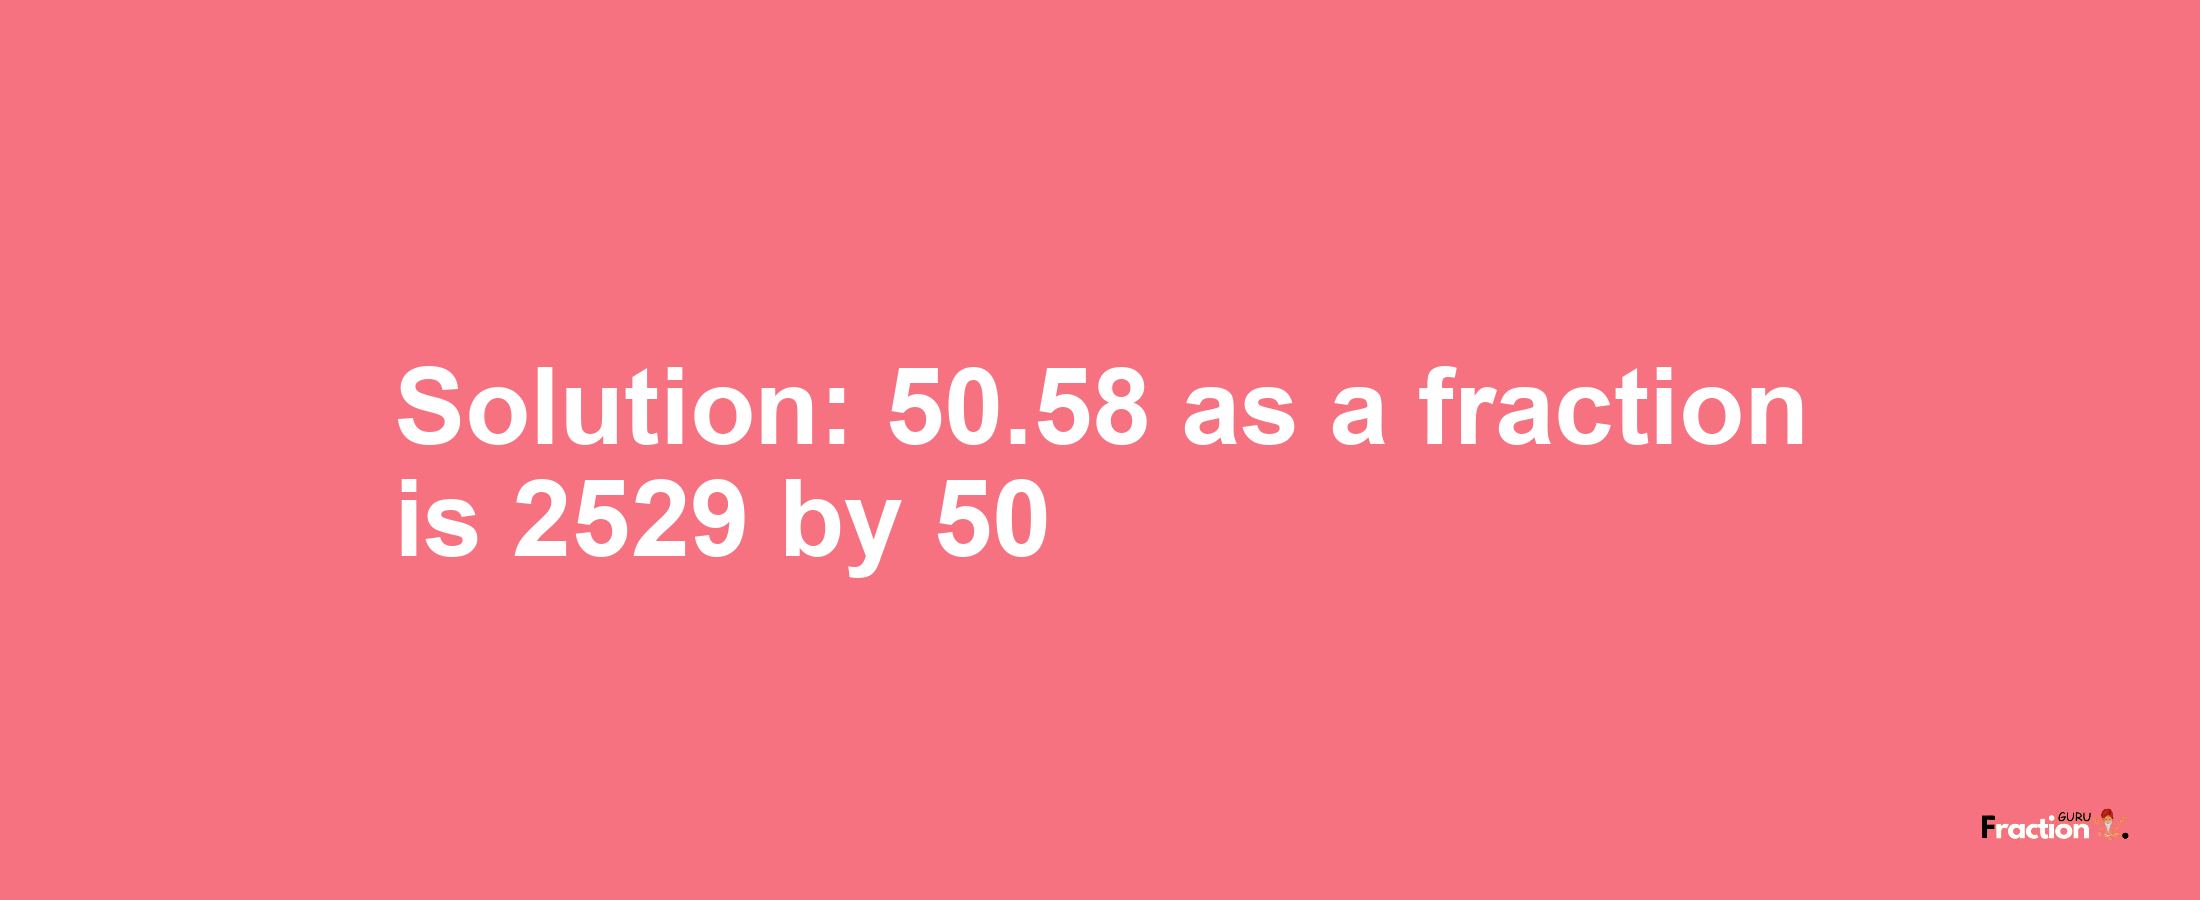 Solution:50.58 as a fraction is 2529/50